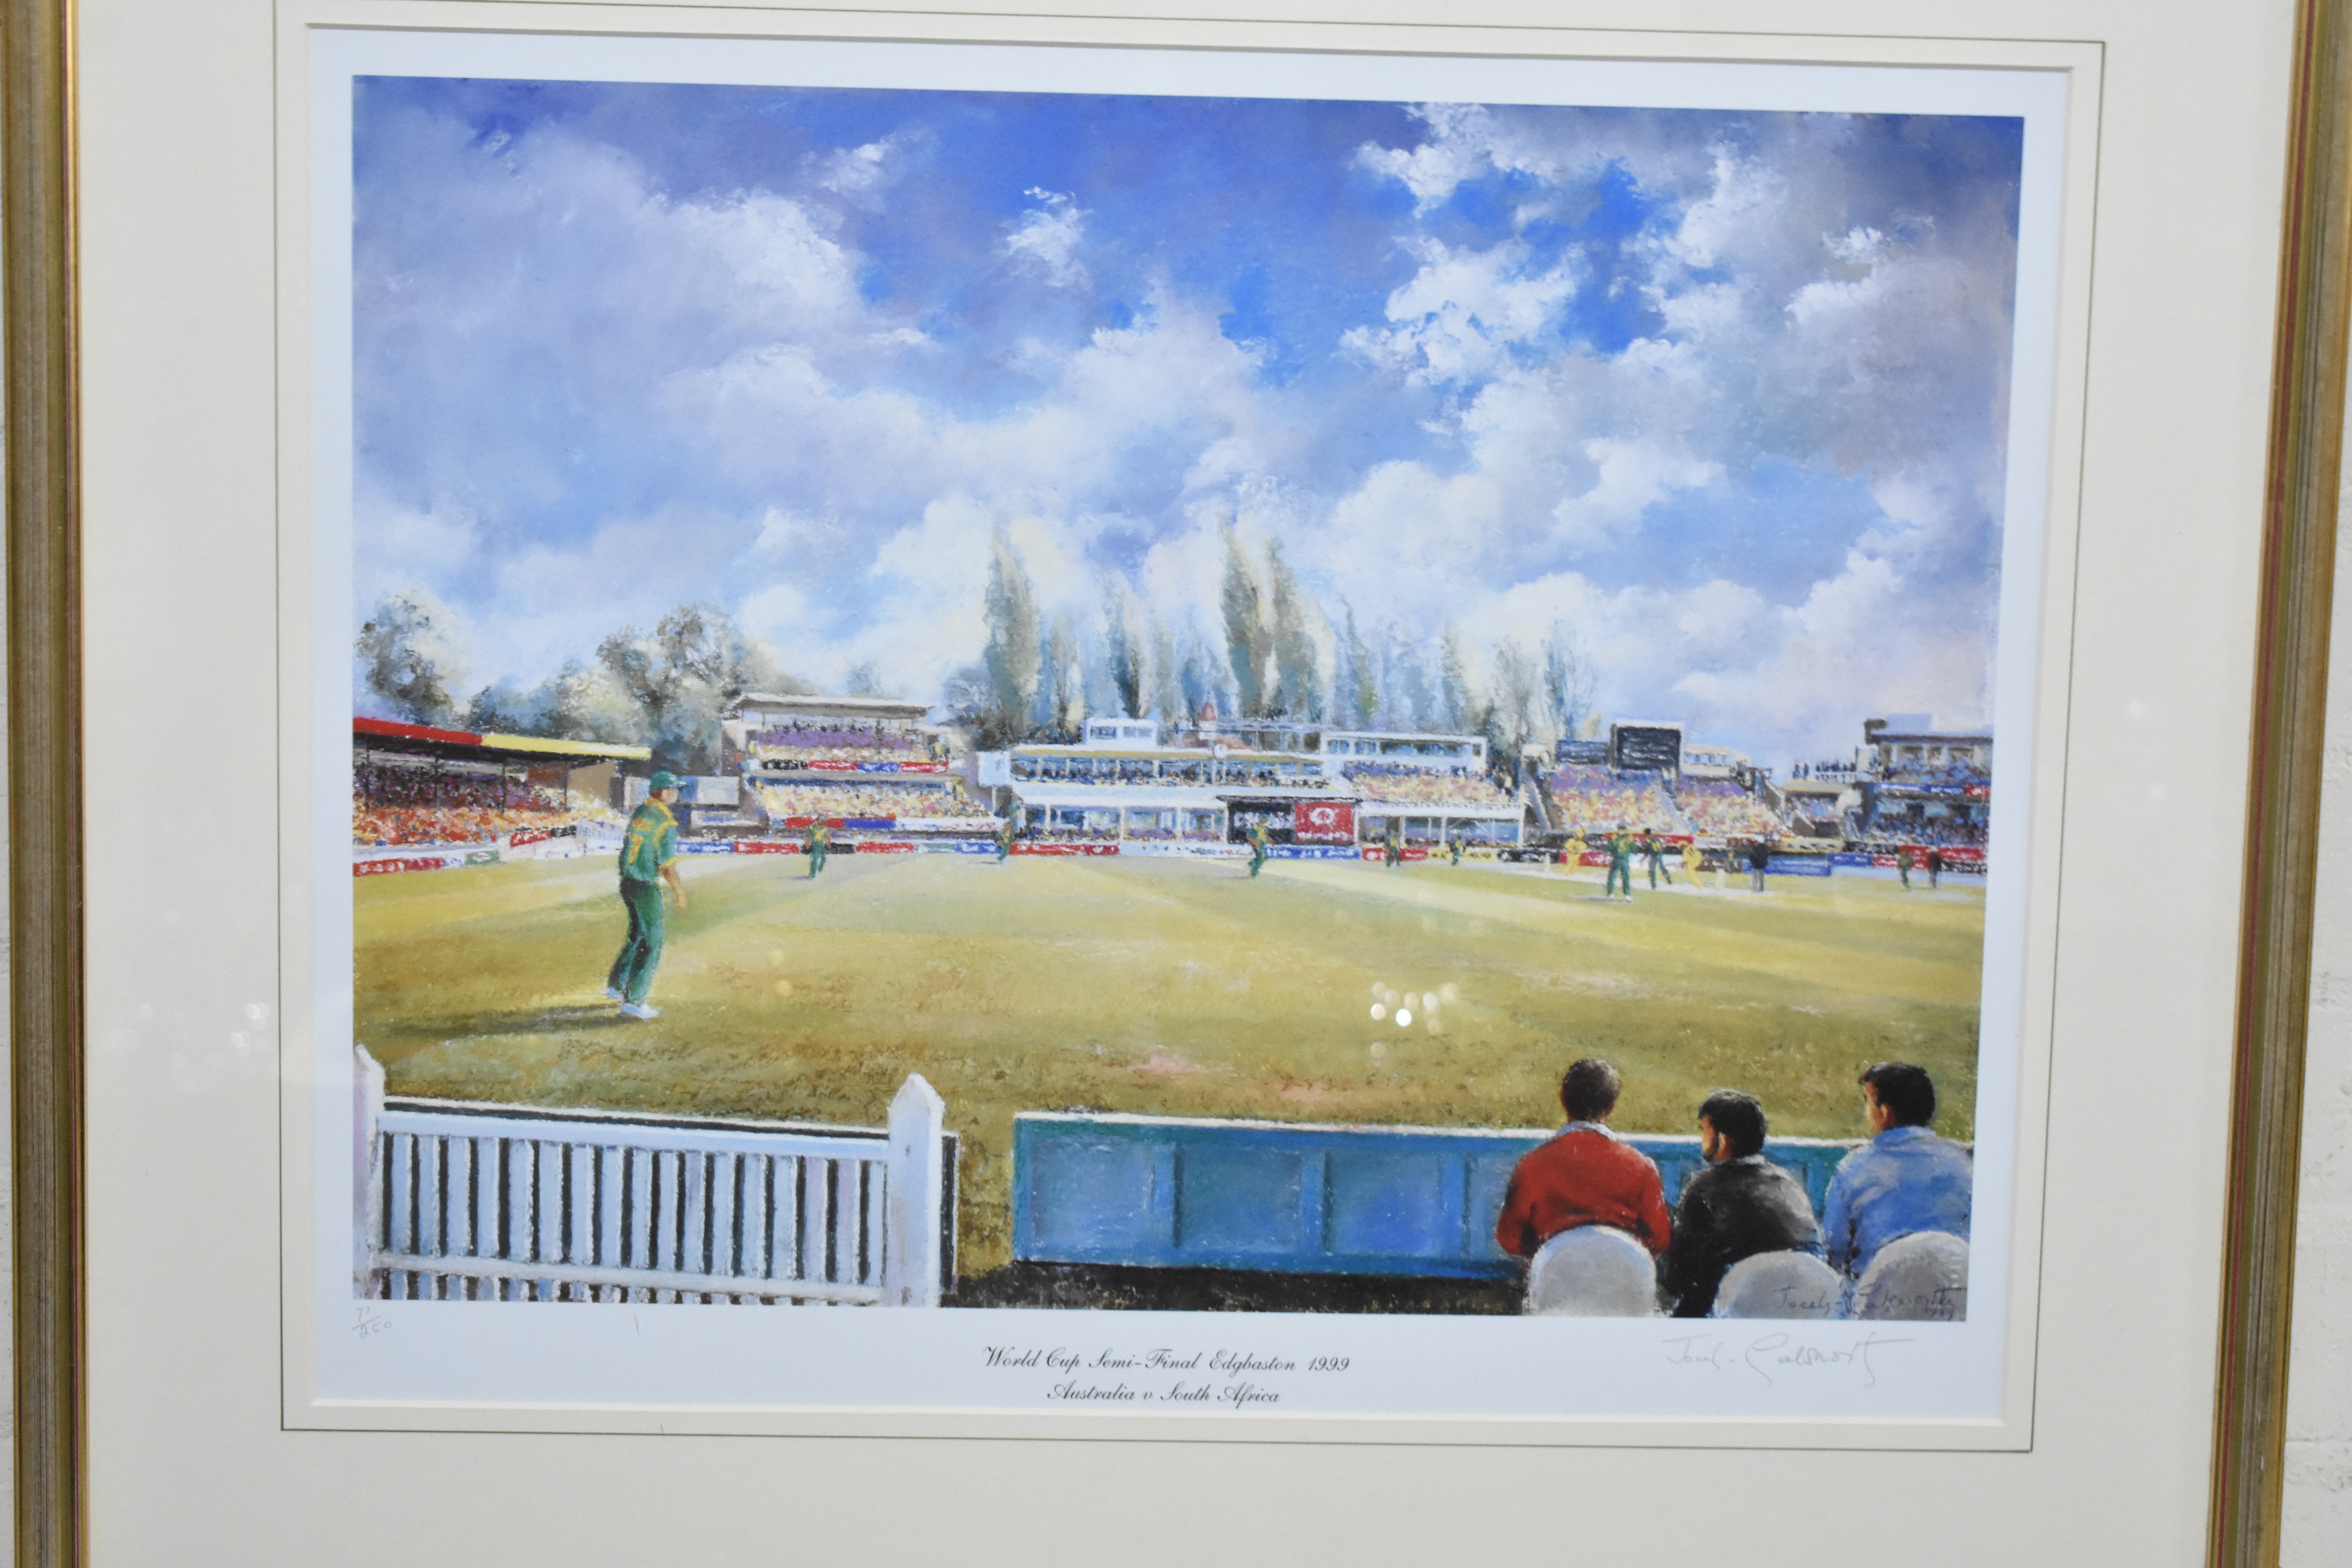 A Framed Cricketing Print together with a Further Cricketing Print, World Cup Semi-Final 1999, - Image 2 of 3